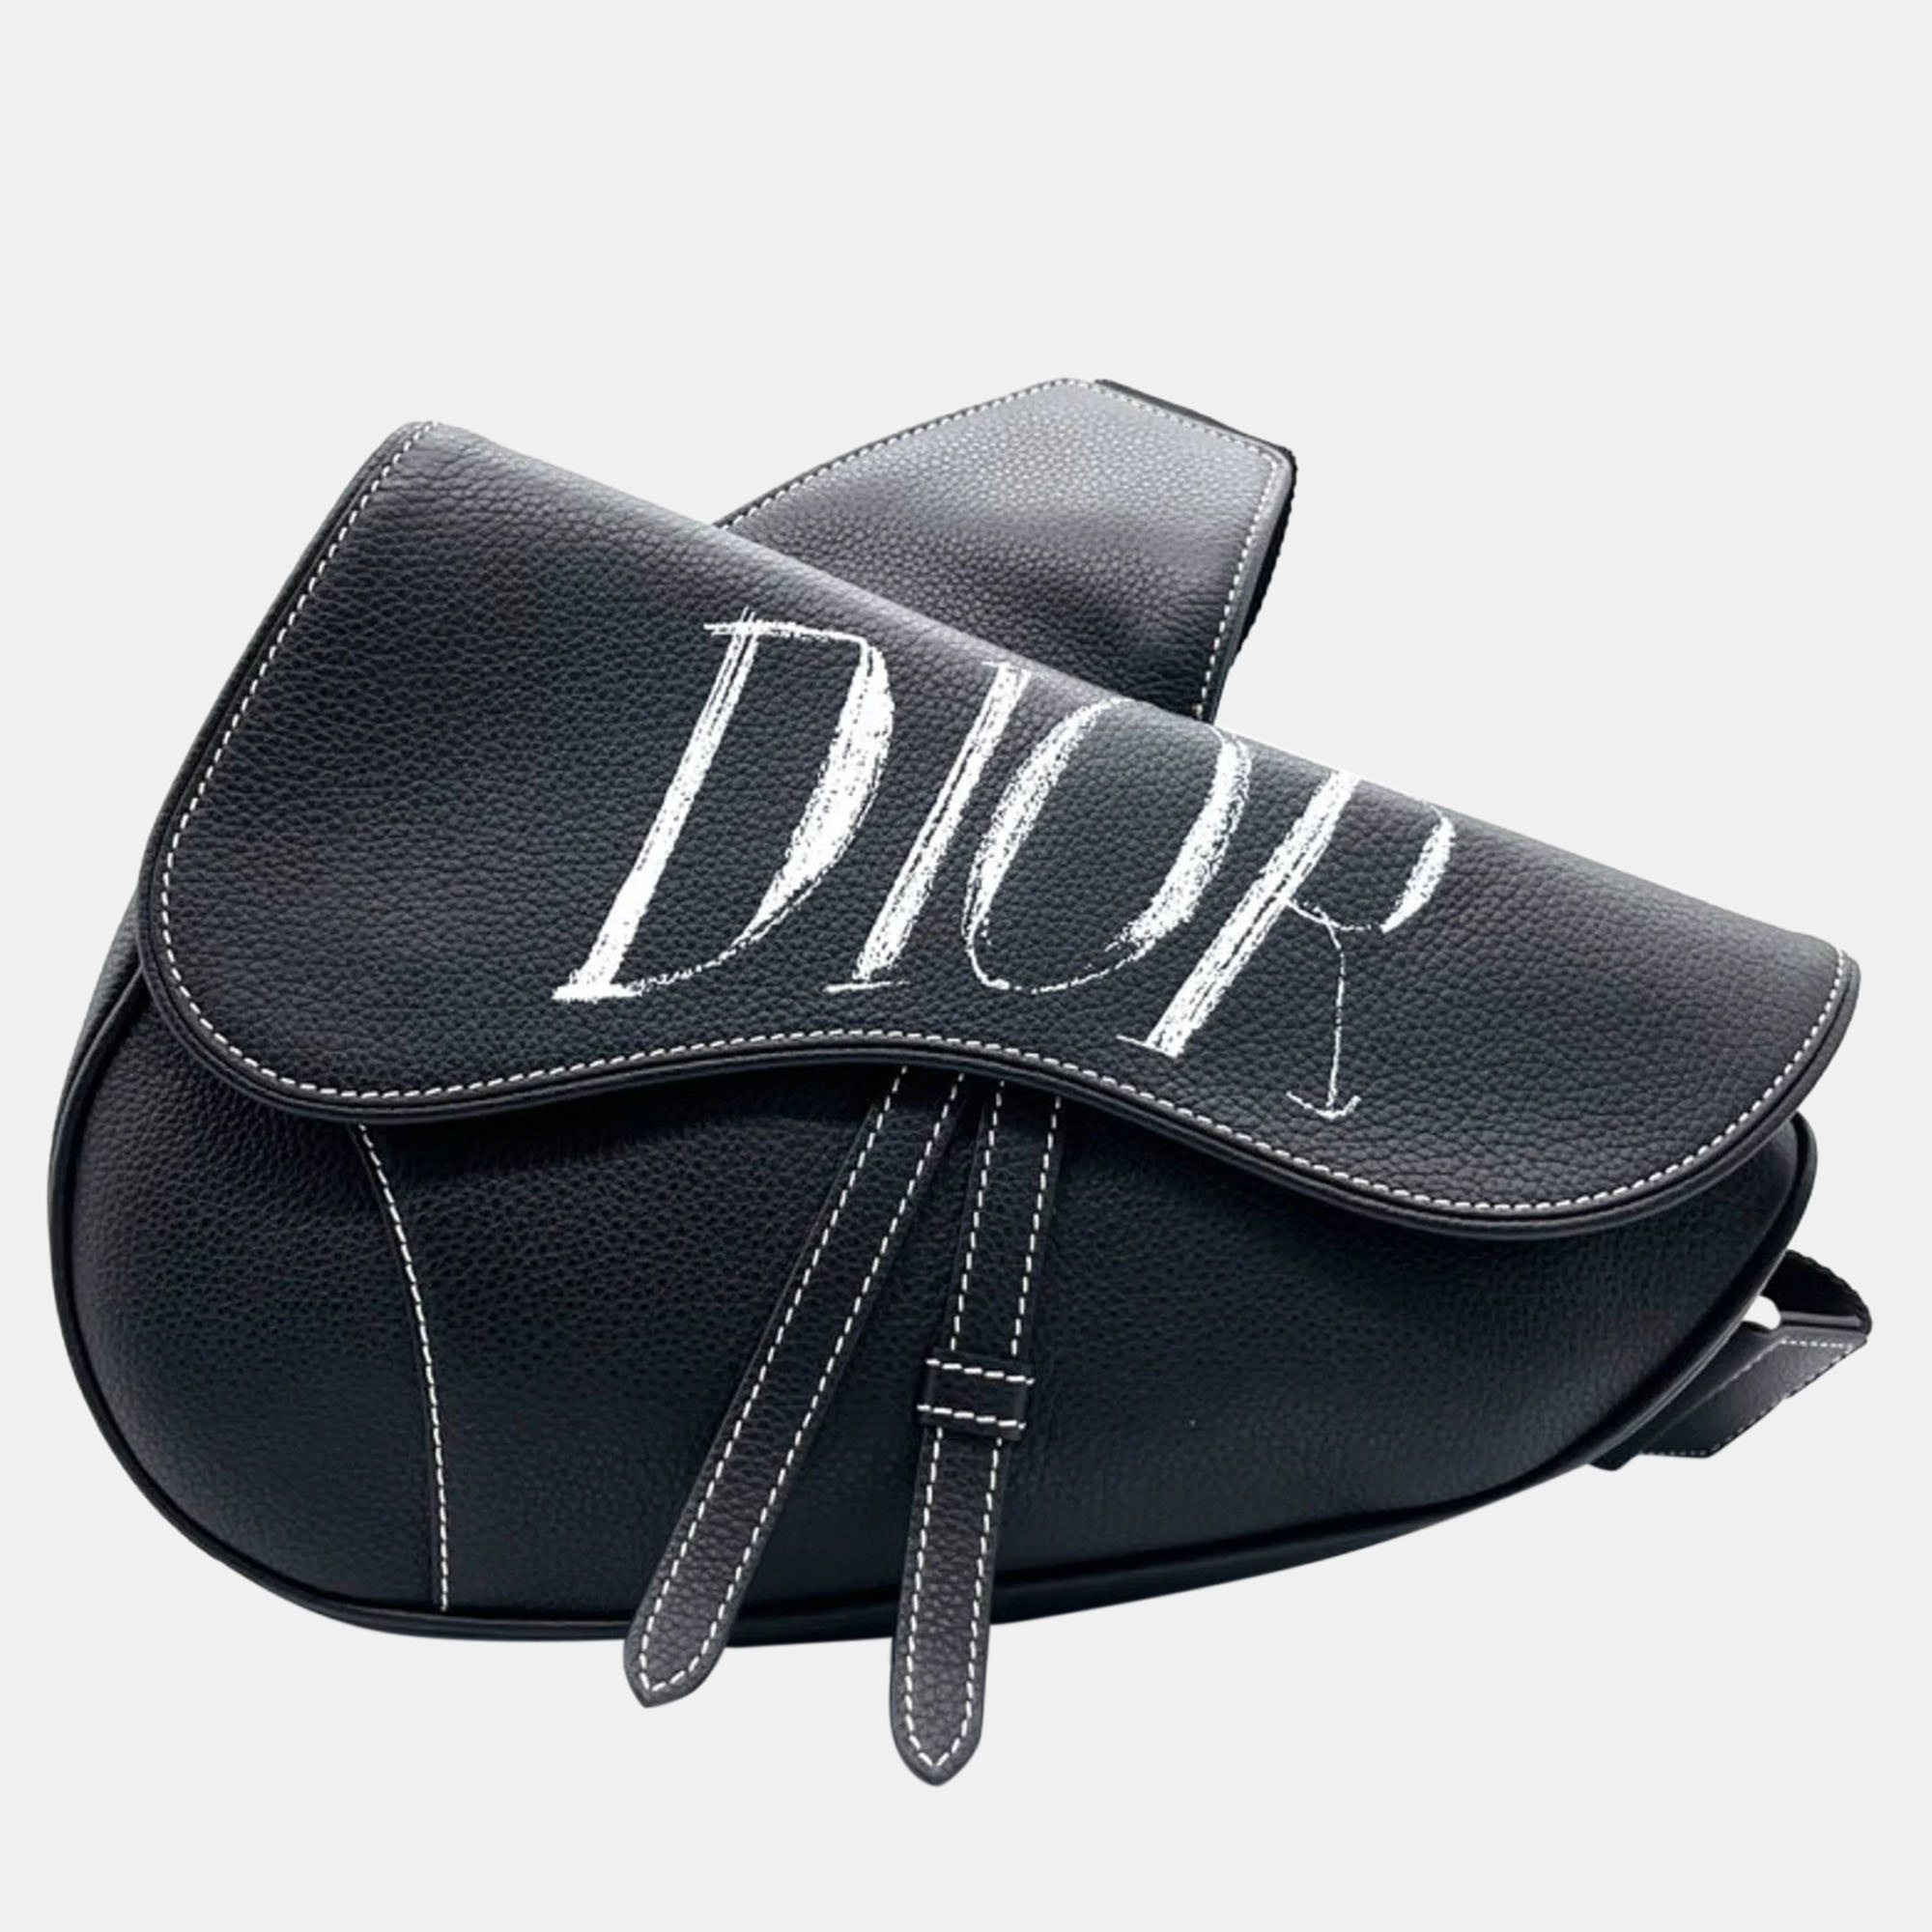 Experience opulence like never before with a genuine Dior bag. Impeccably crafted featuring iconic Dior design elements its the ultimate accessory for those who demand the finest in fashion.